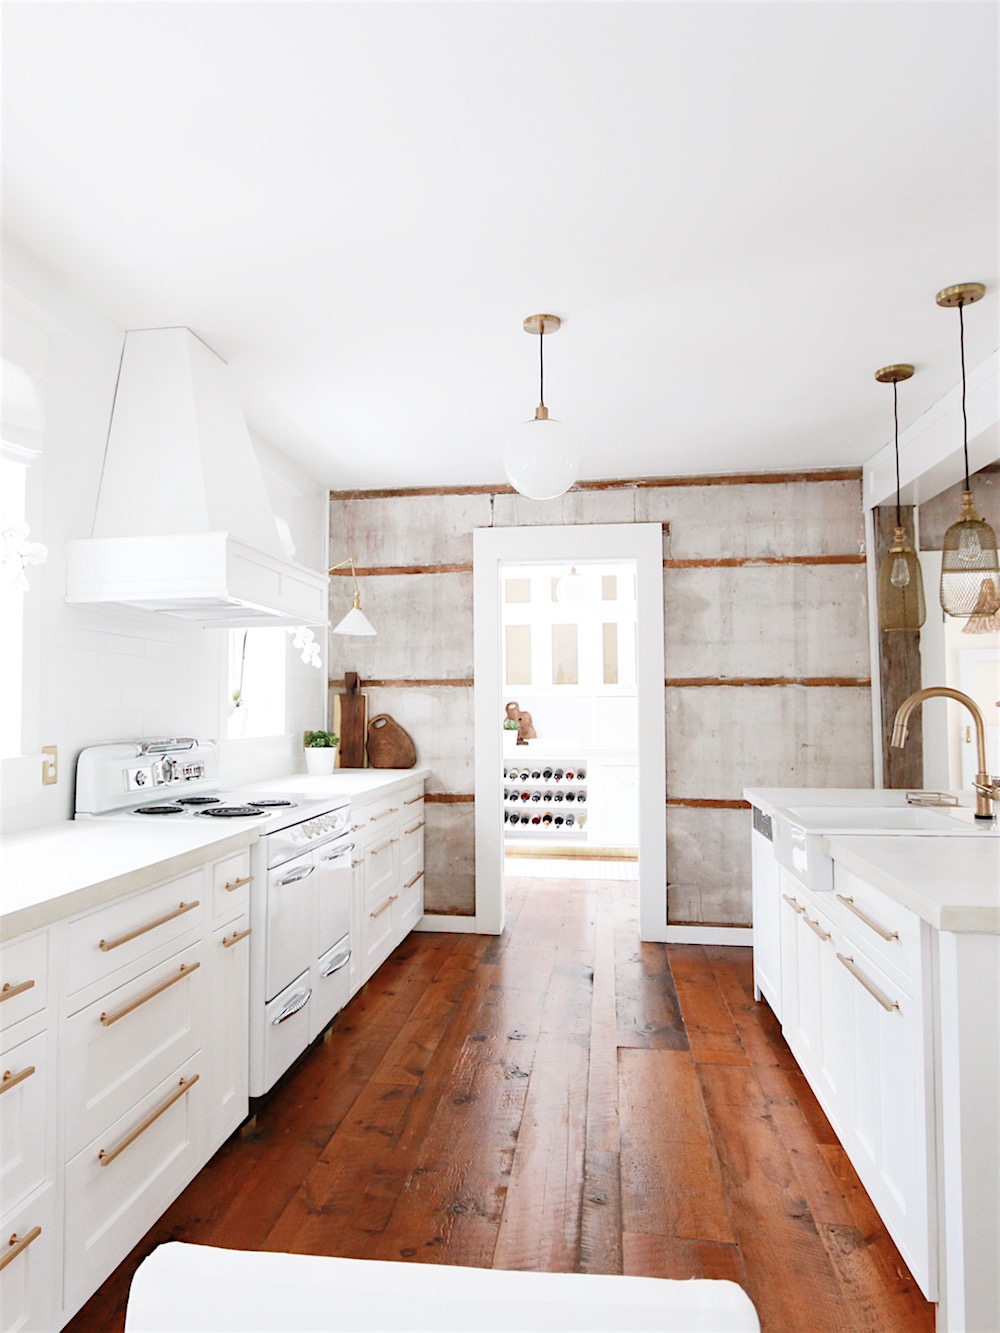 Before and after photos of an ahhhmazing kitchen renovation via @lynneknowlton | DESIGN THE LIFE YOU WANT TO LIVE. Enter the contest for a chance to win a champagne bronze faucet from @DeltaFaucetCan https://lynneknowlton.com/giveaways/faucet/